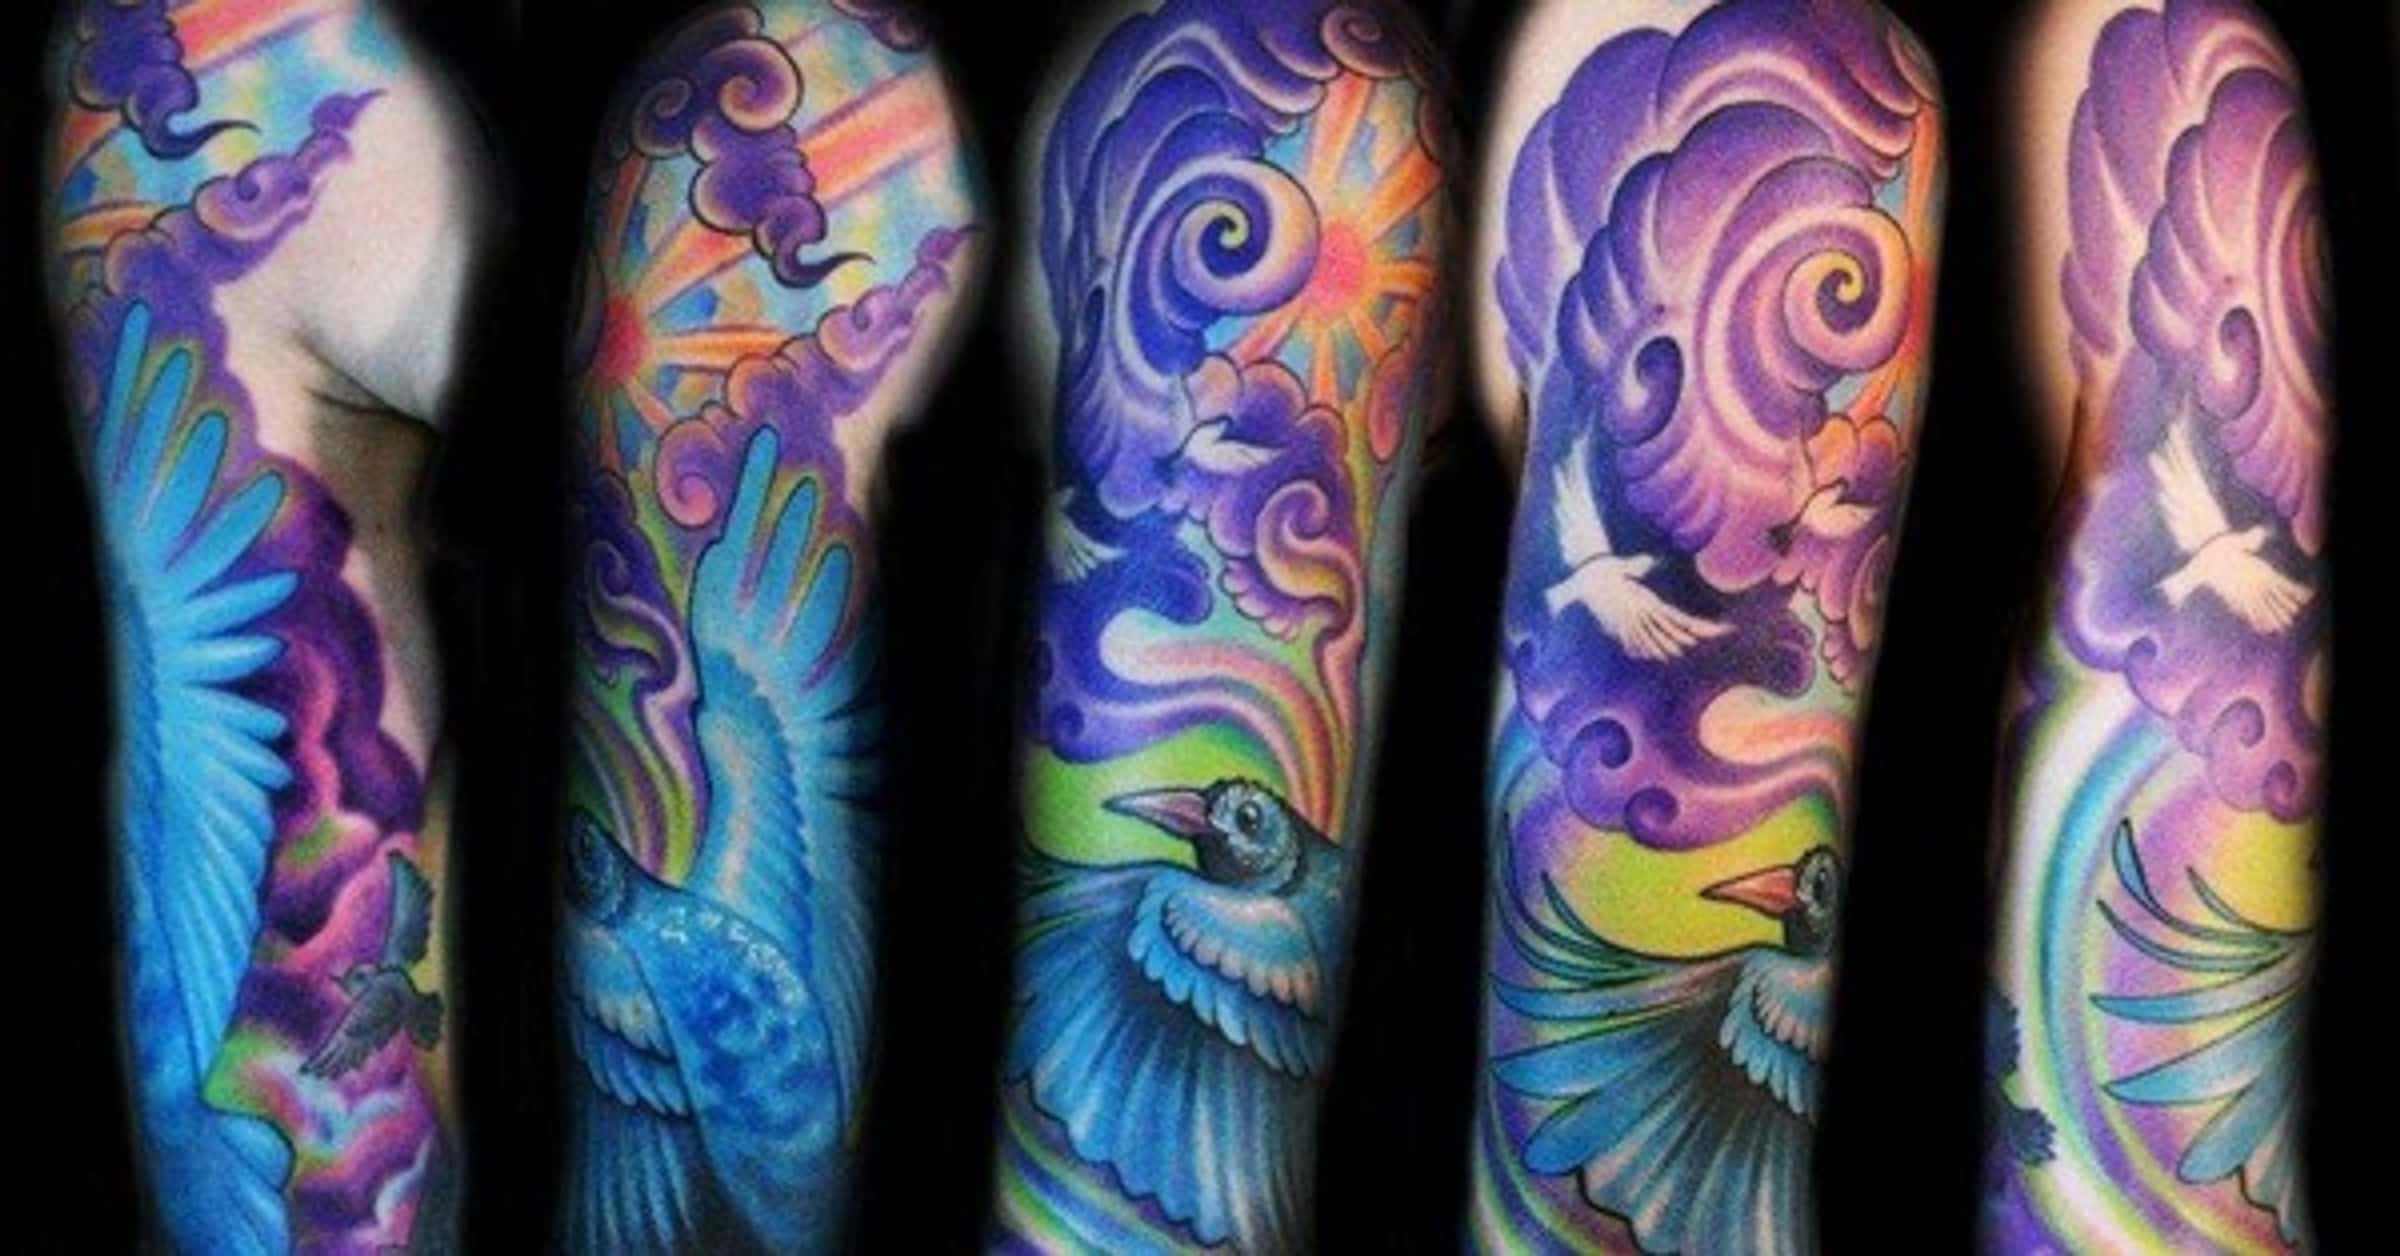 Dragon Arm Sleeve Tattoo Placement - wide 6